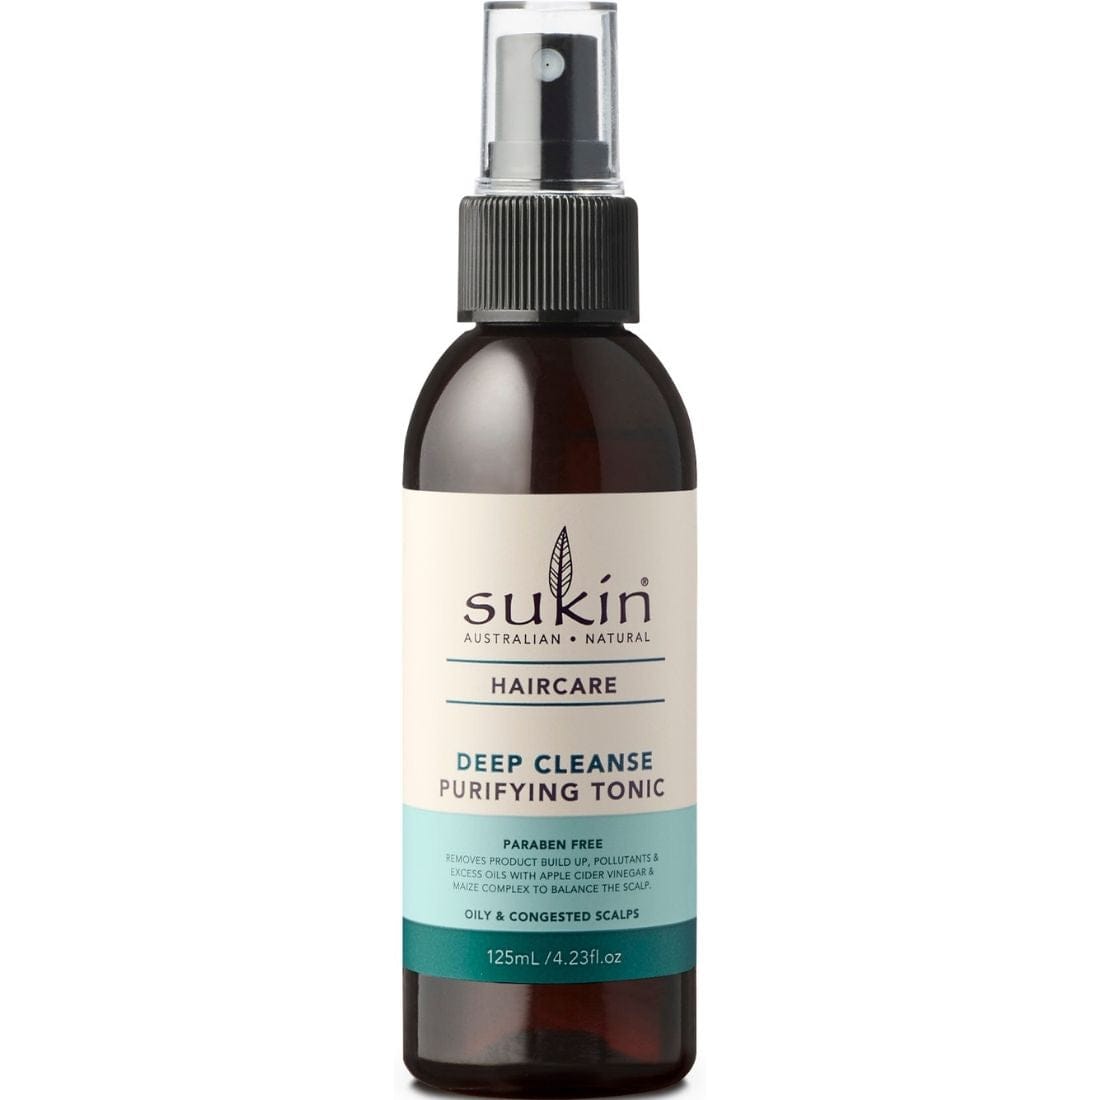 Sukin Deep Cleanse Purifying Tonic, 125 ml, Clearance 40% Off, Final Sale